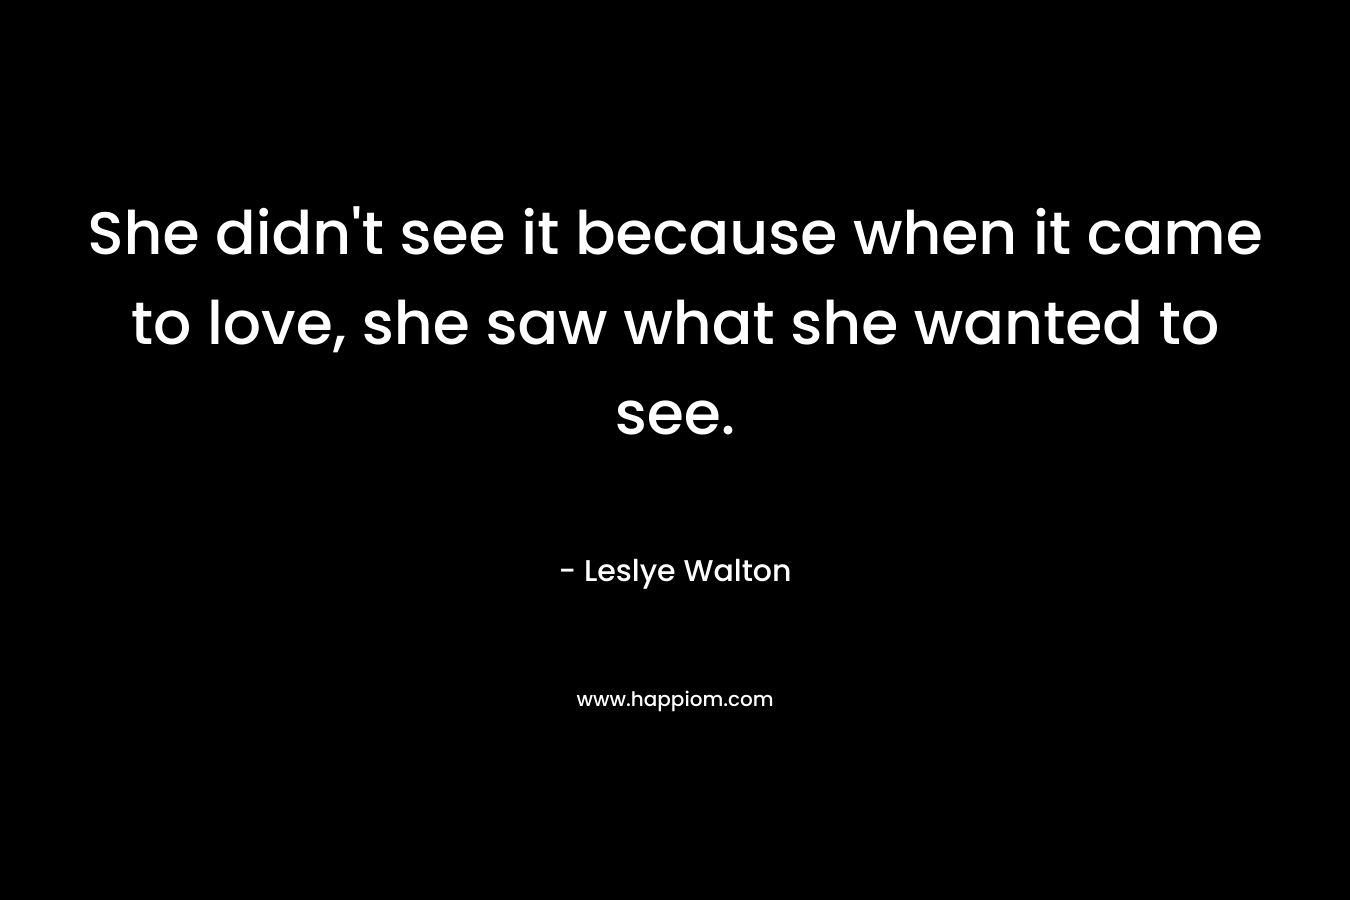 She didn't see it because when it came to love, she saw what she wanted to see.